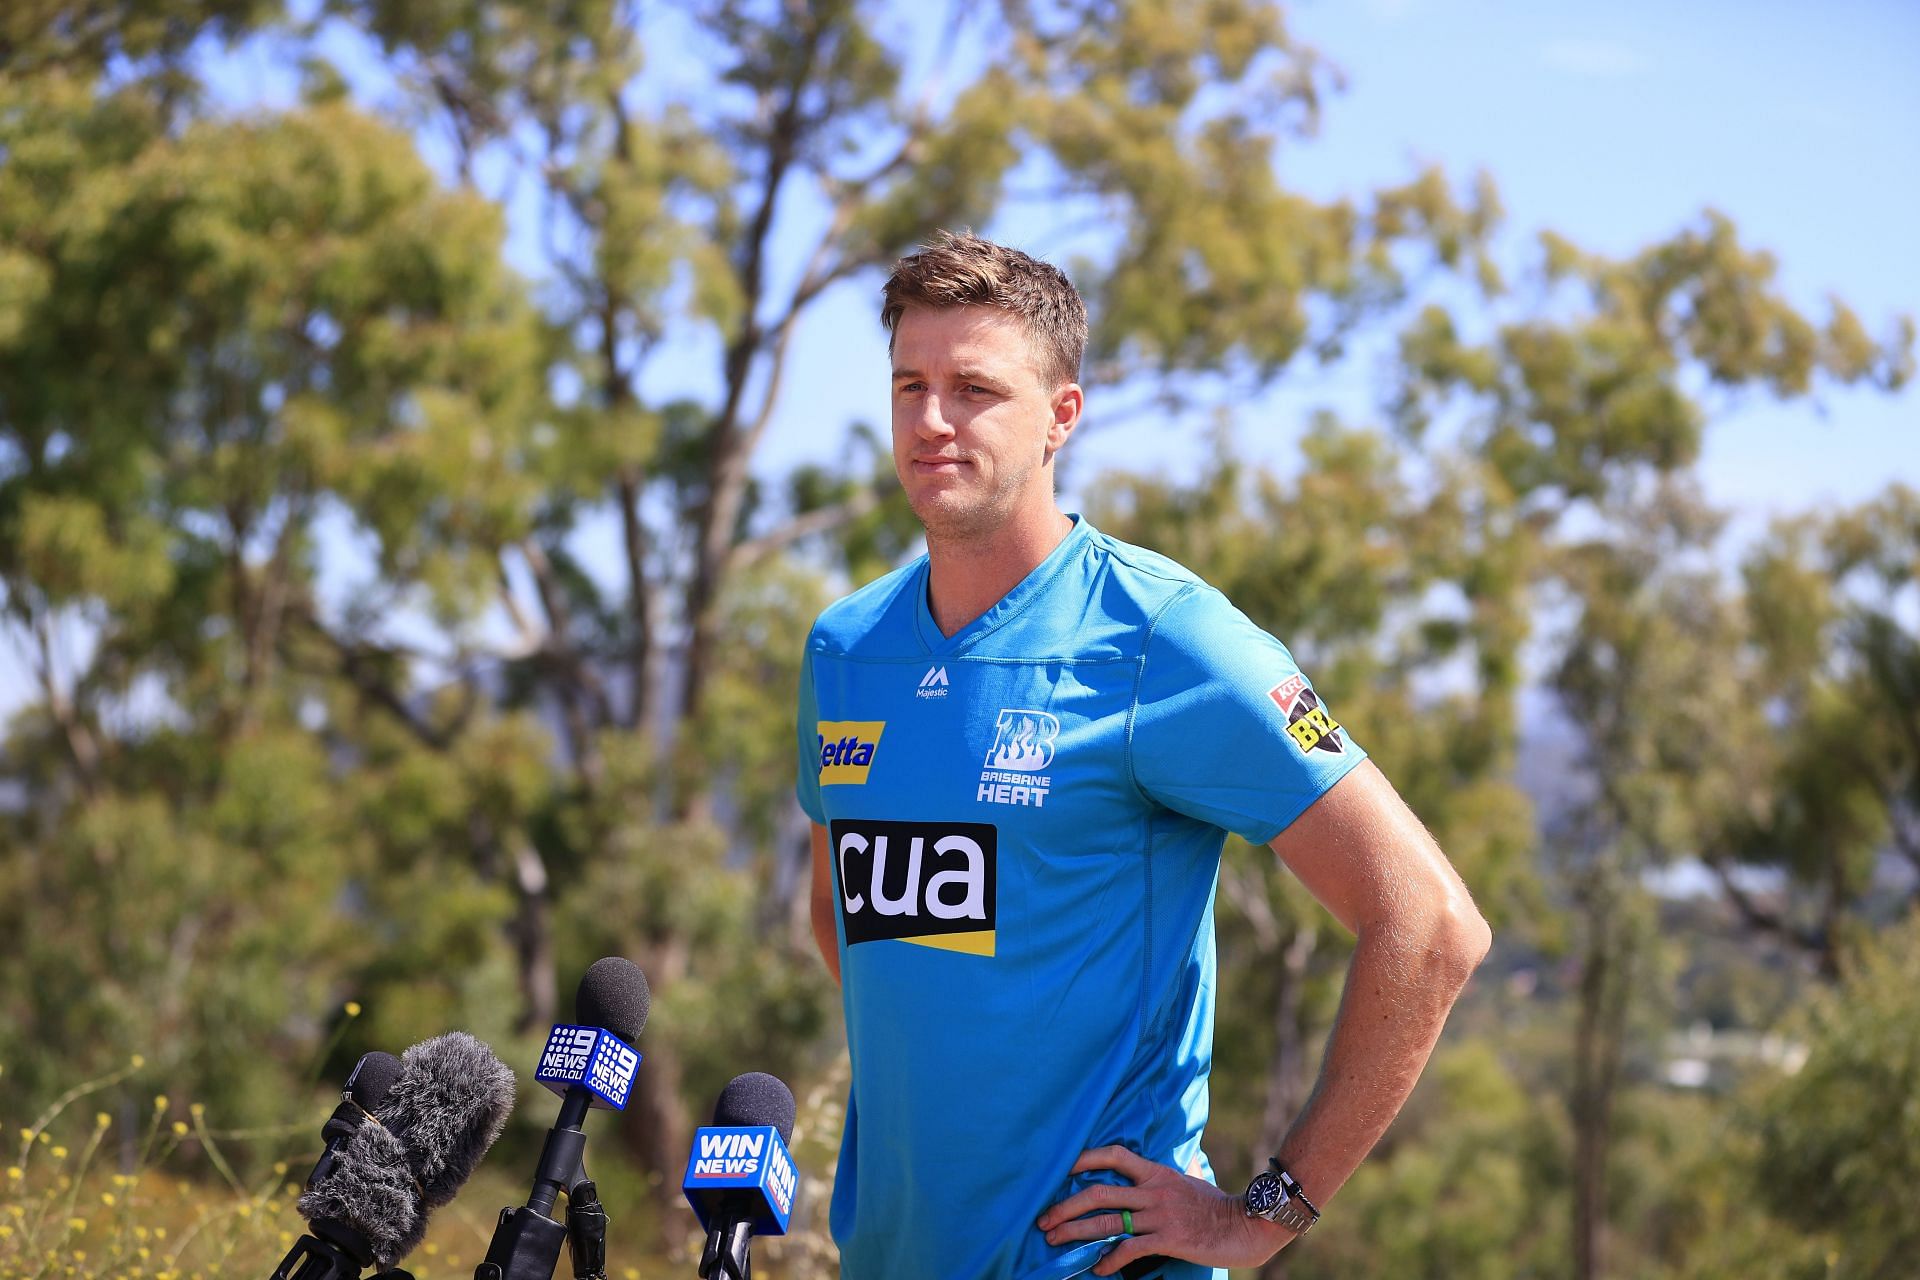 Morne Morkel to join Team India's coaching staff for Test series against Bangladesh: Reports